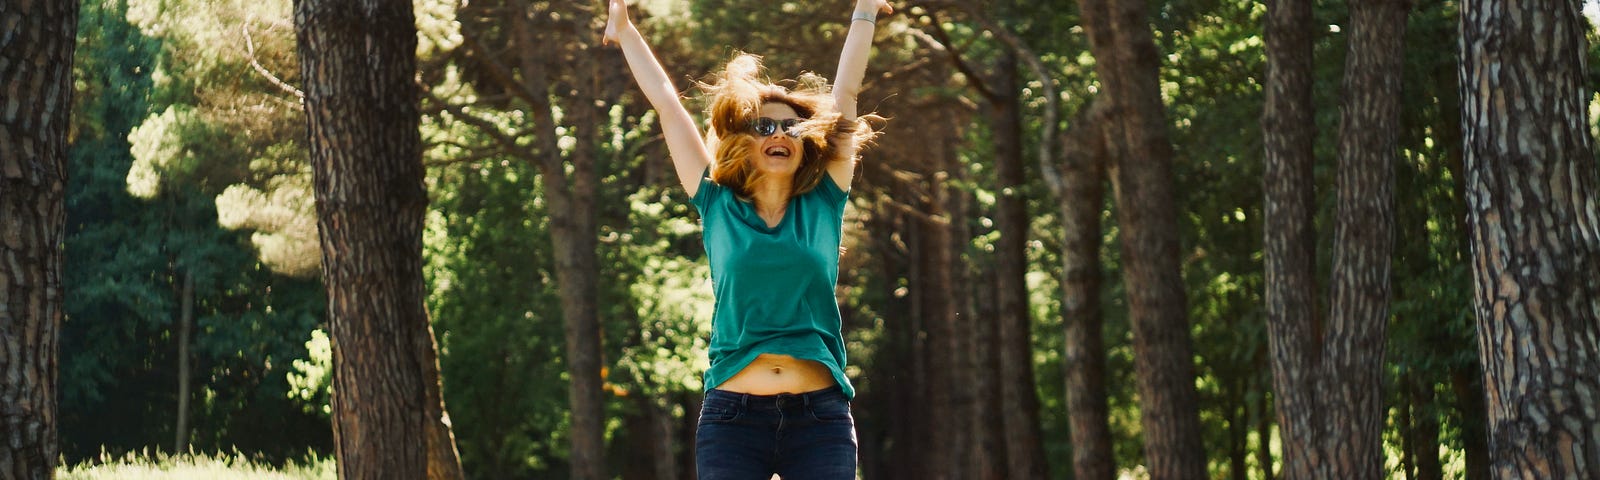 woman on a walking path jumping in the air with knees bent and hands in the air